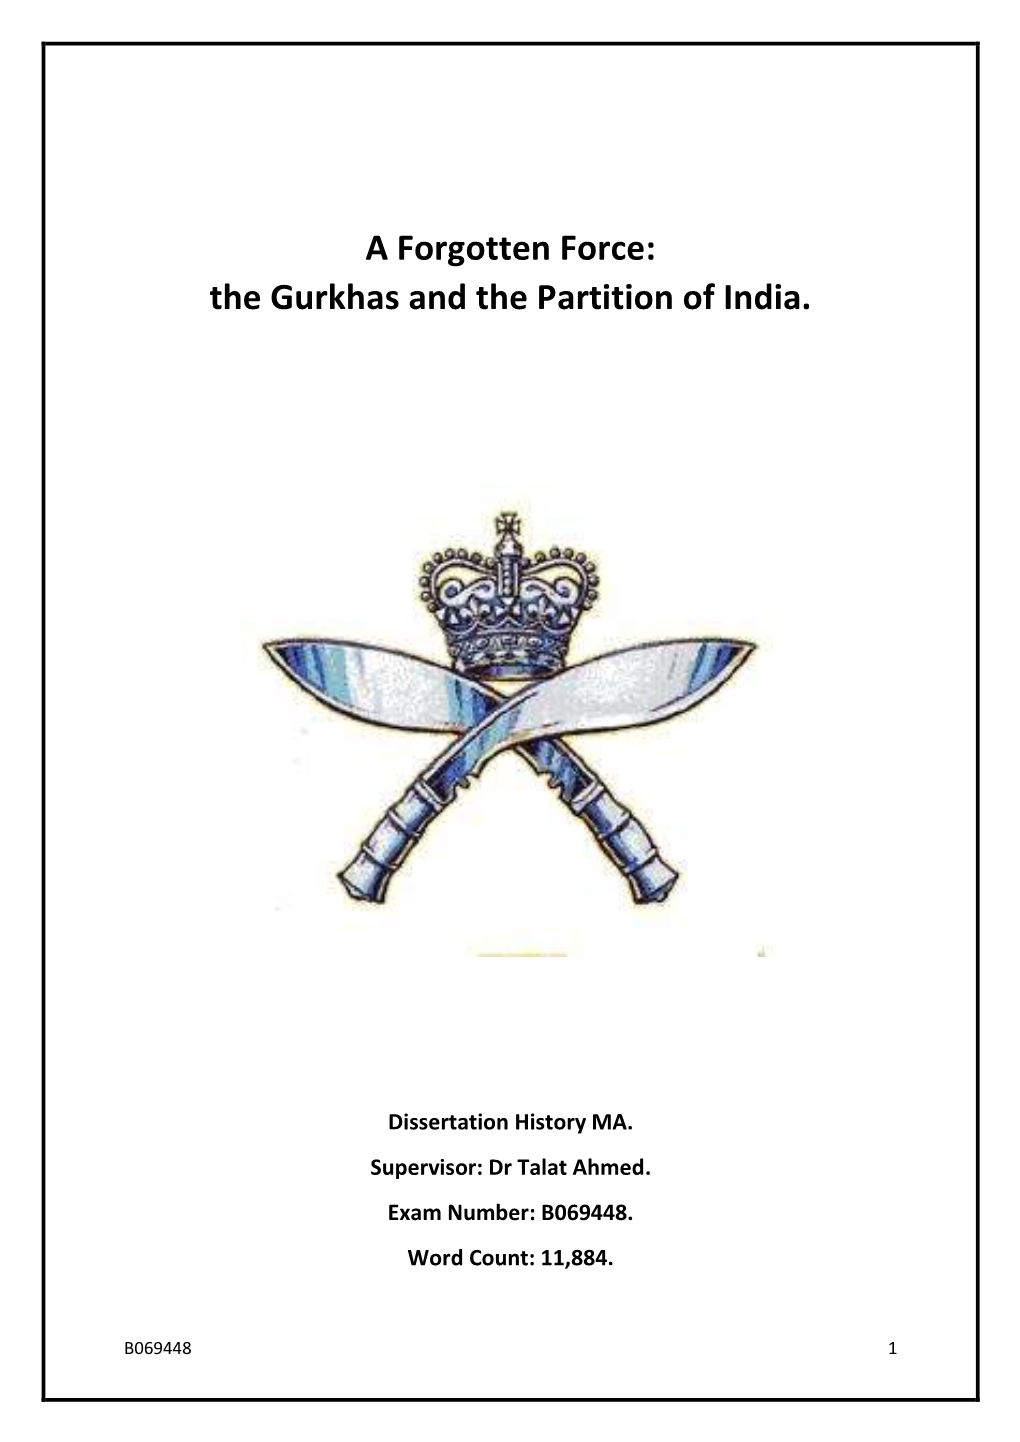 A Forgotten Force: the Gurkhas and the Partition of India